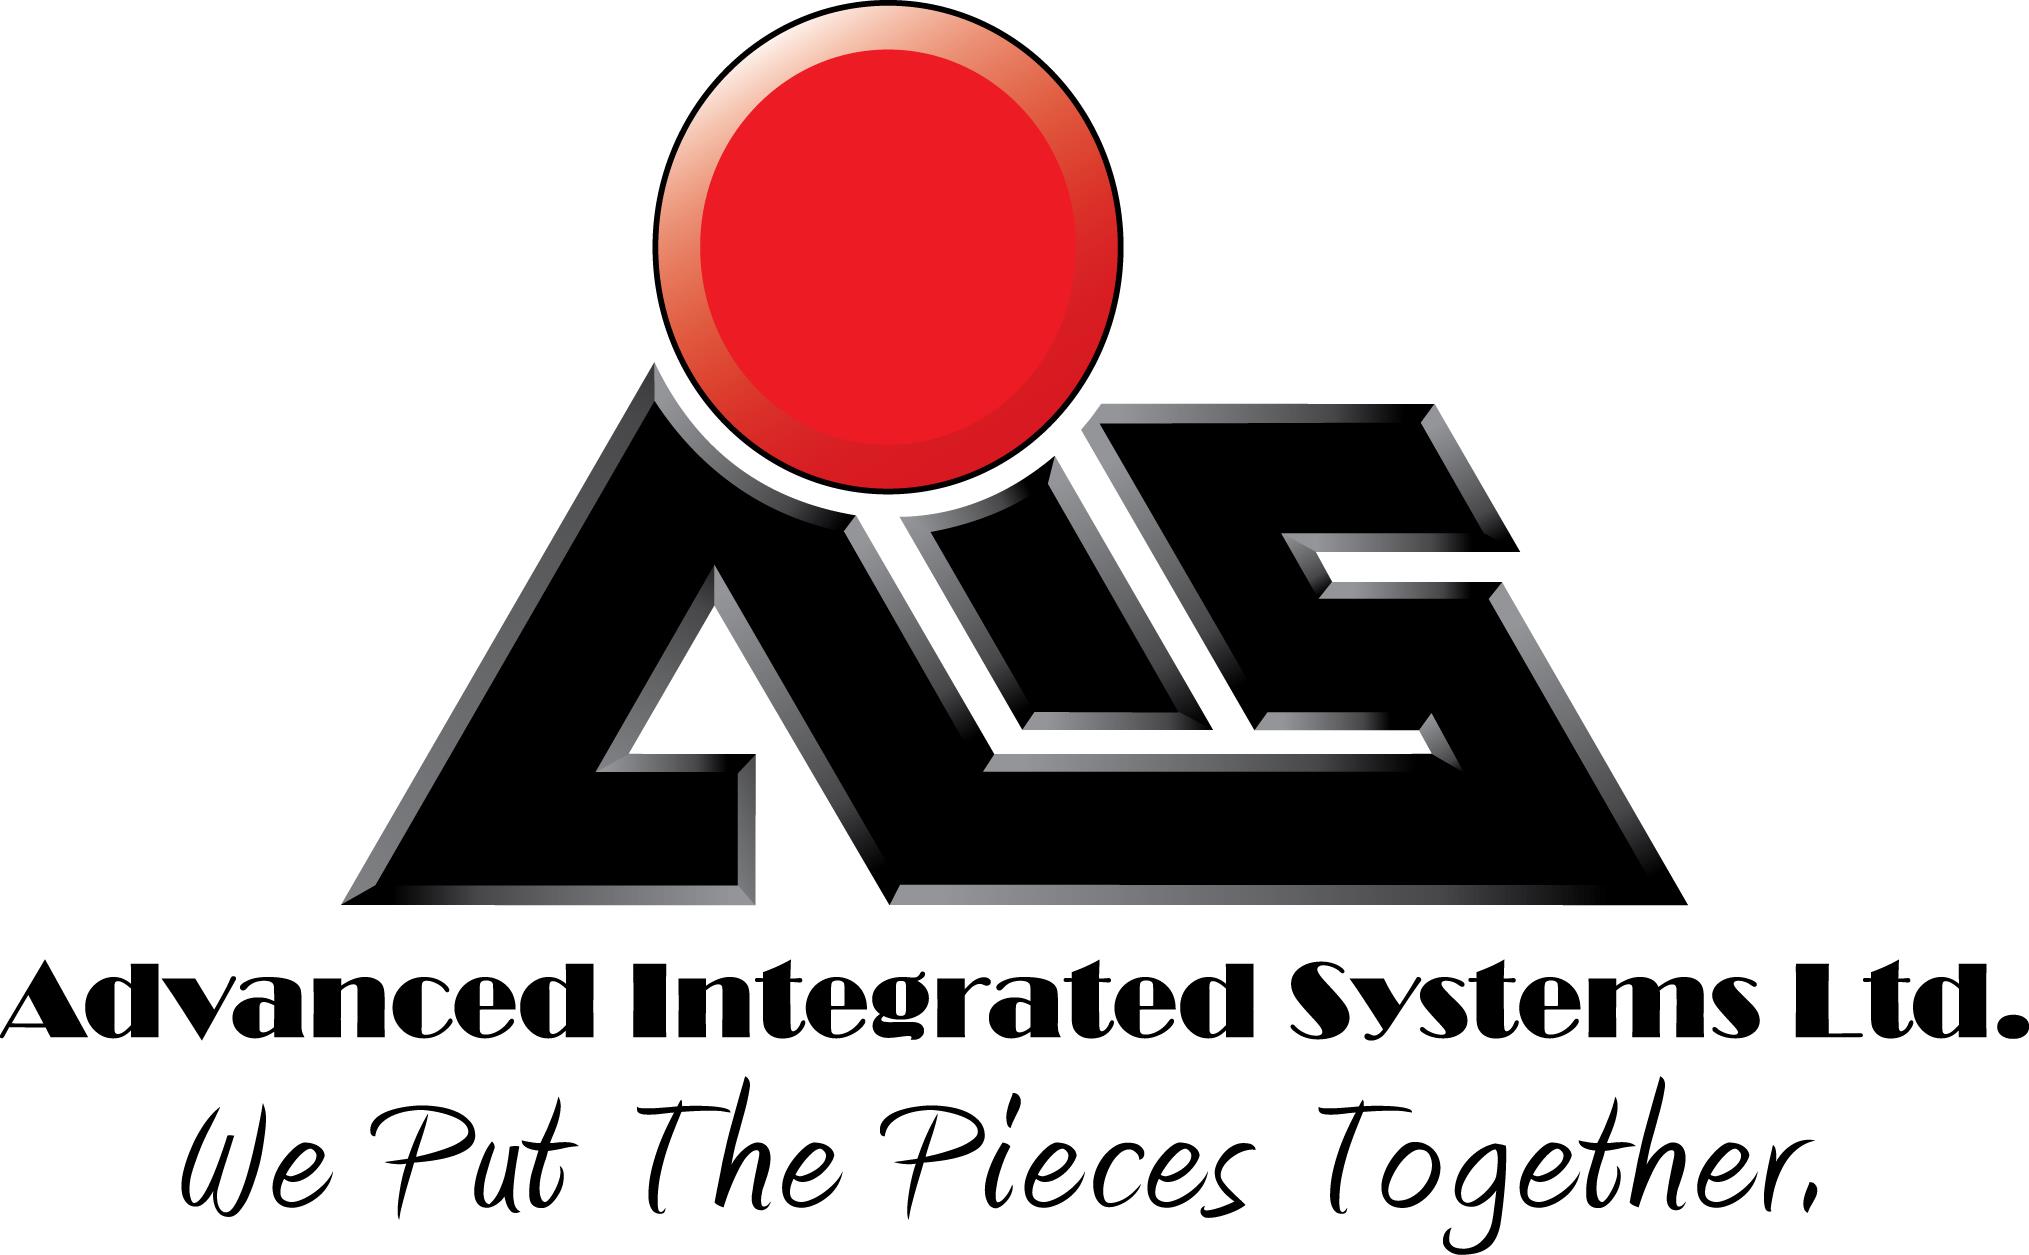 Advanced Integrated Systems Ltd - E Commerce Internet Shopping Online Services